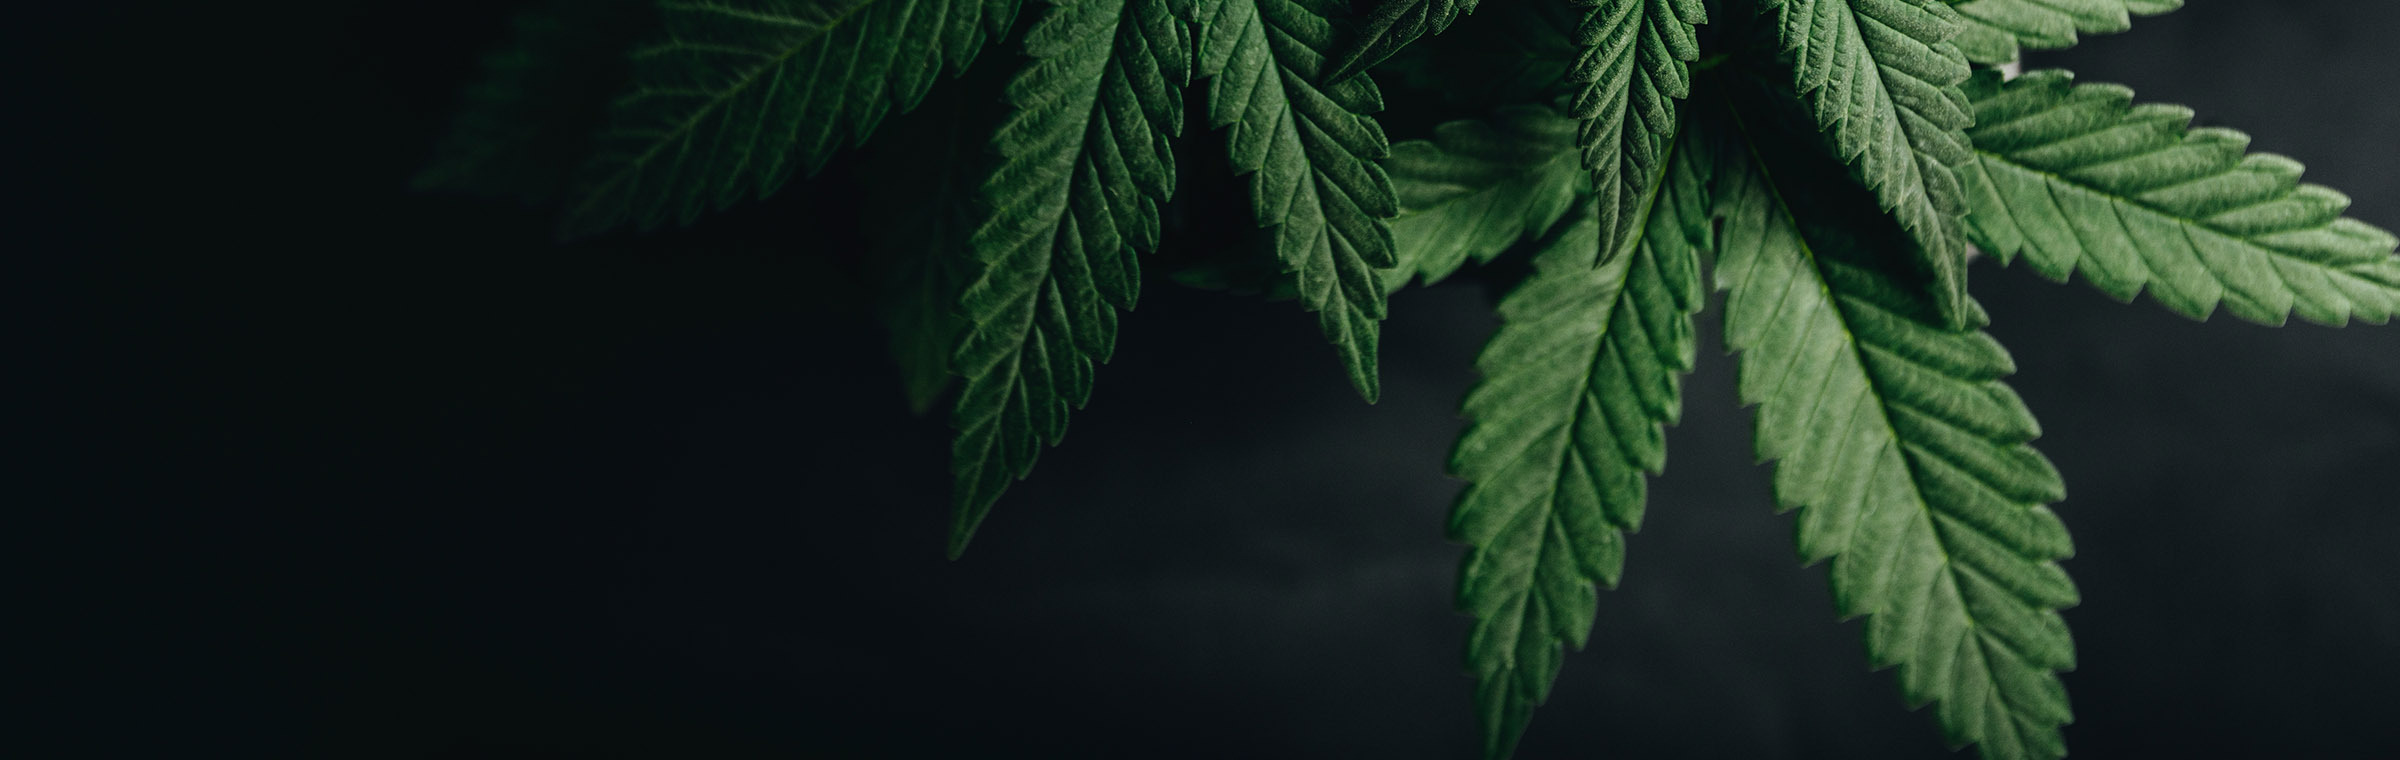 cannabis plant on a back background